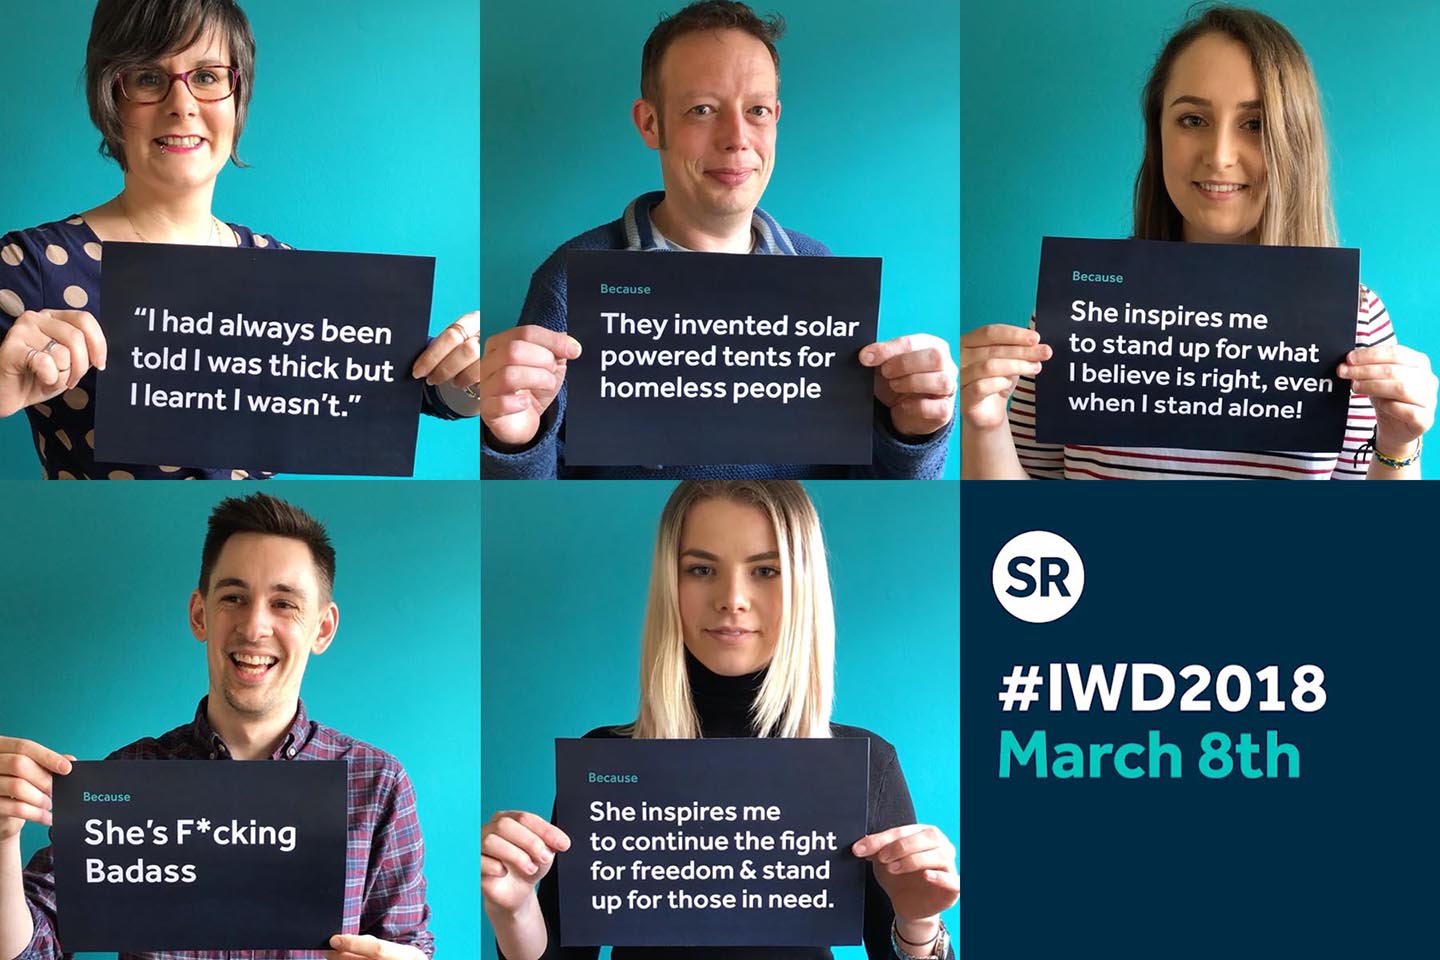 Our team's take on IWD 2018